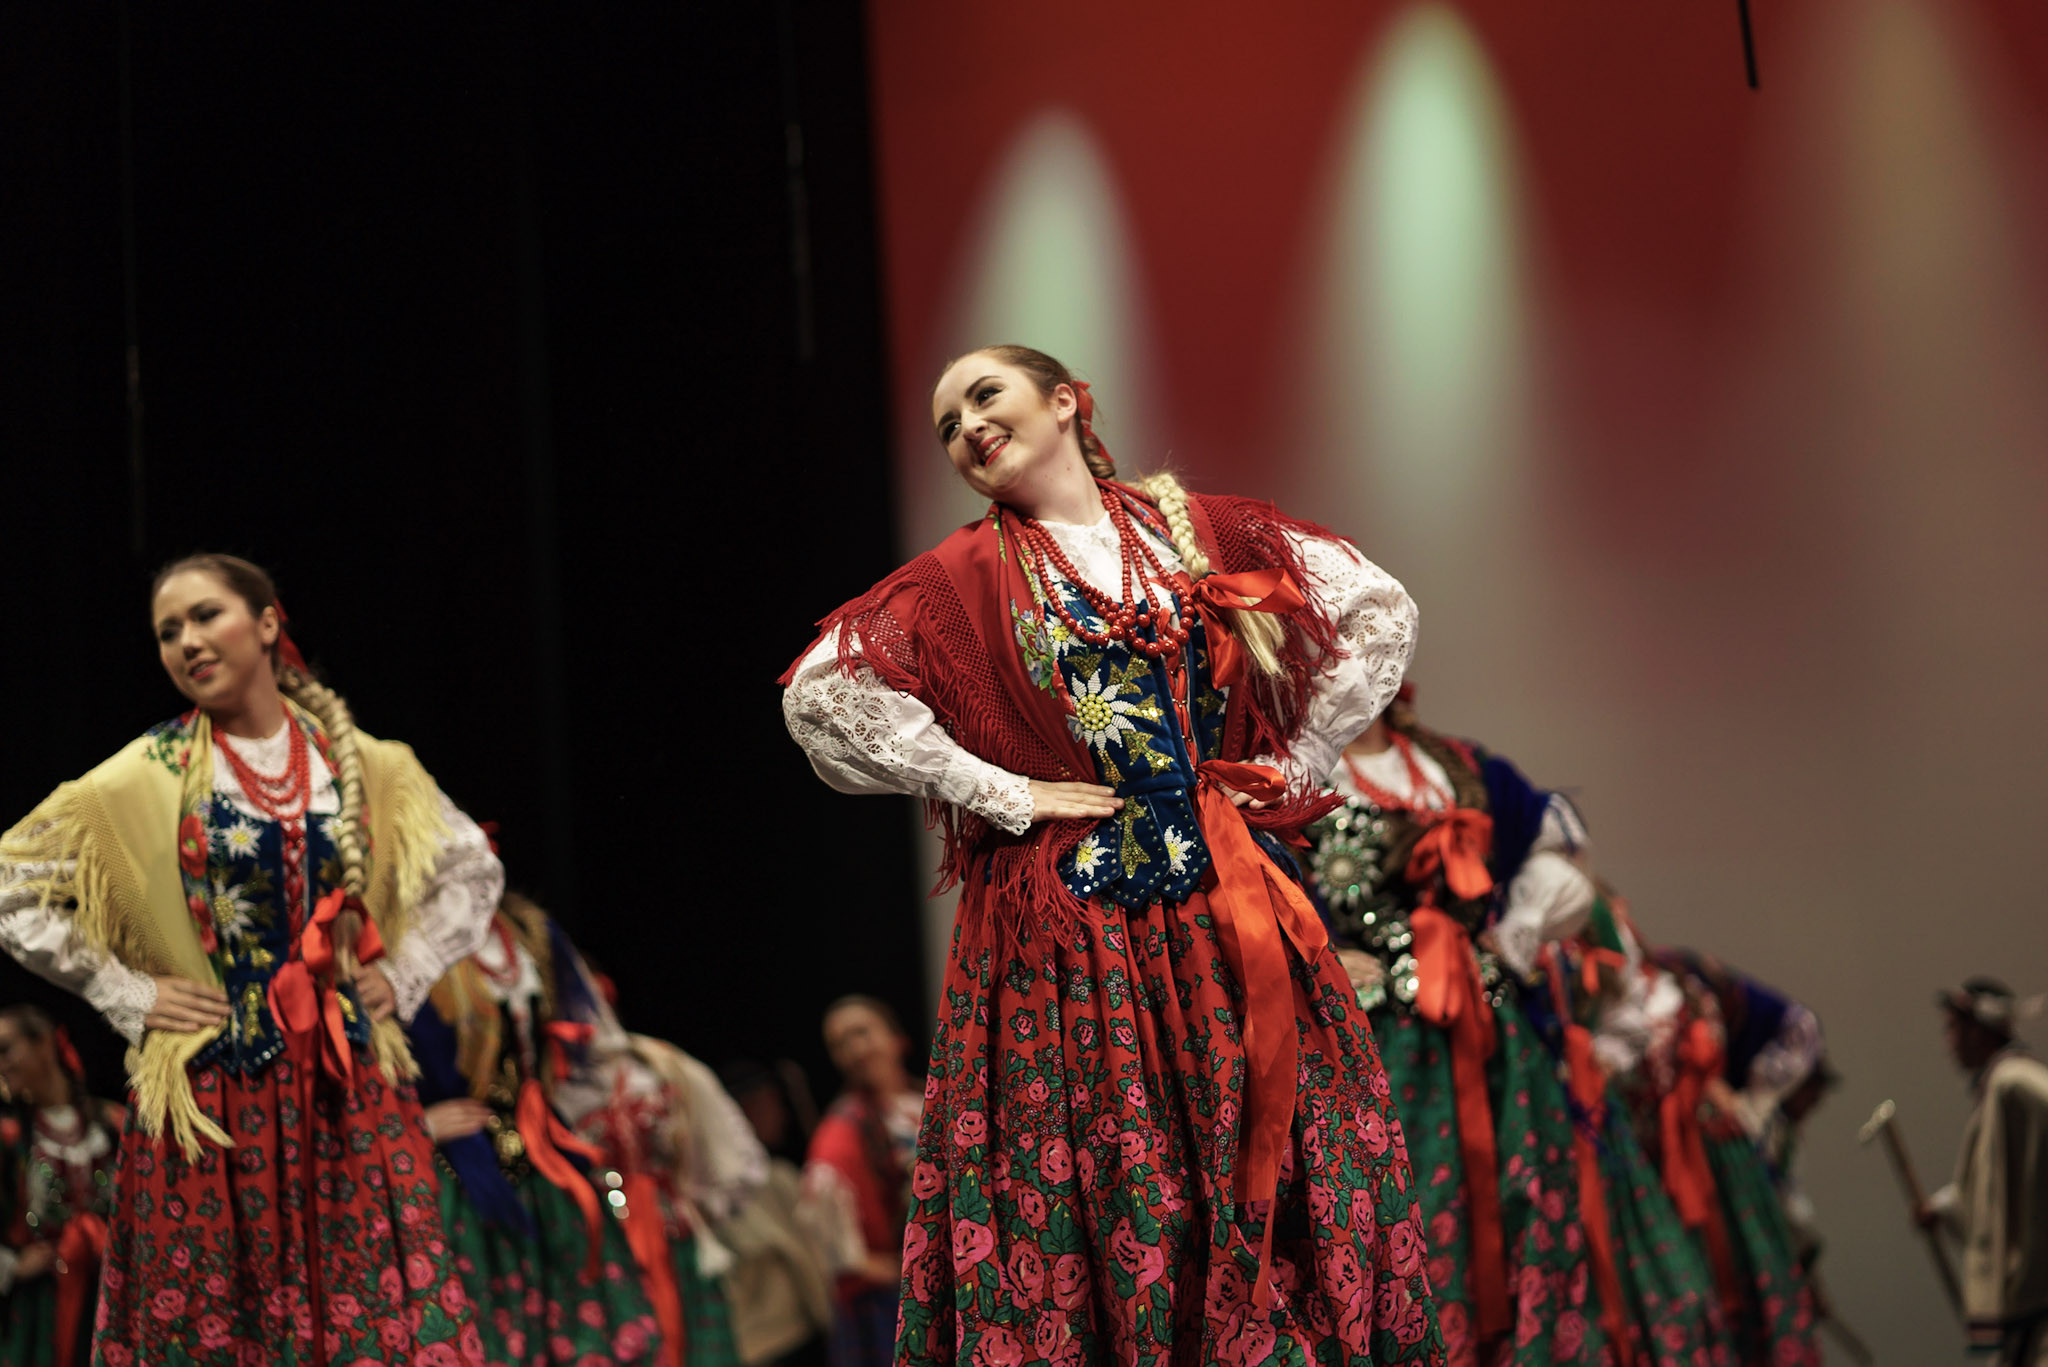 The elements of the Polish highland dances are echoed in the music composed by Stanislaw Moniuszko in his opera “Halka”. Highlander culture is distinctive as it is rich in its architecture, music, and painting. The colourful costumes are highly original, reflecting the unique environment in which they were created.